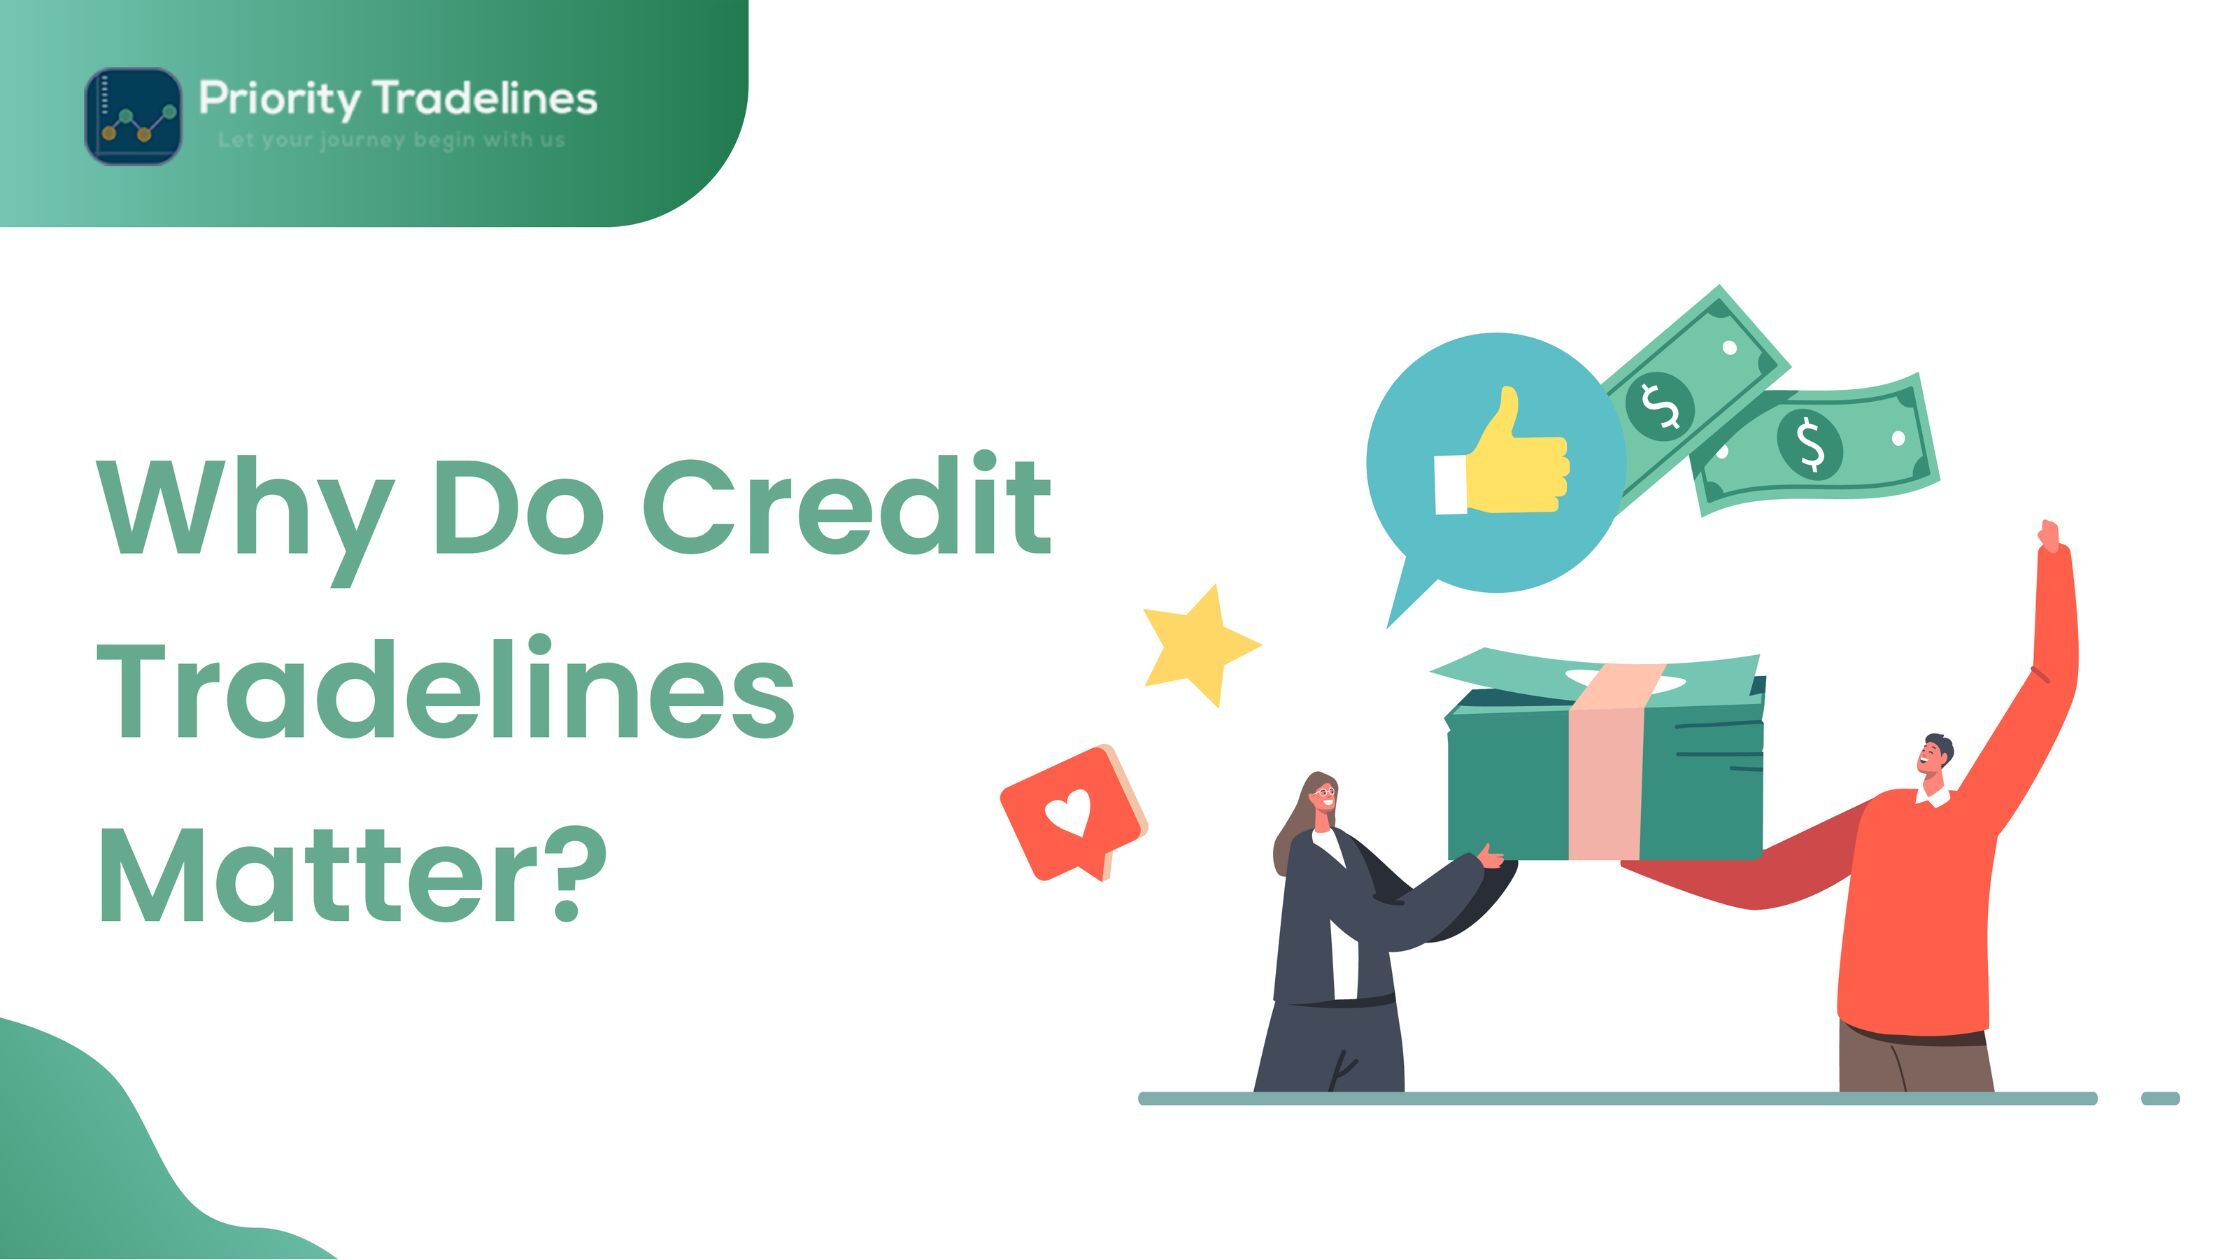 Why do credit tradelines matter